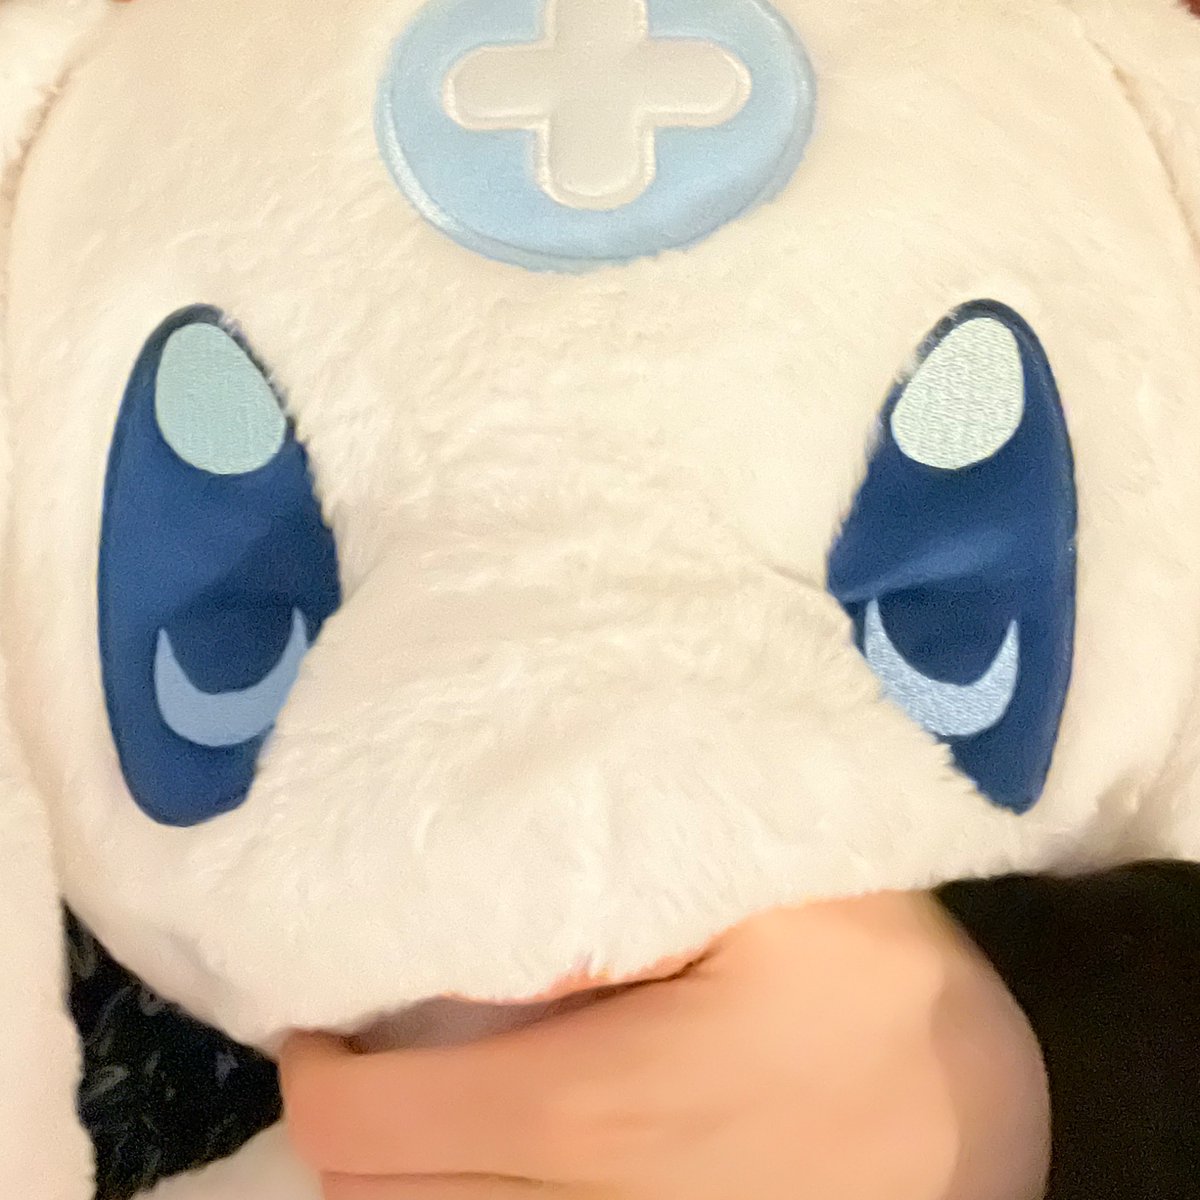 After coming home I finally got to hug this fat ass plushie that’s been waiting for me for months